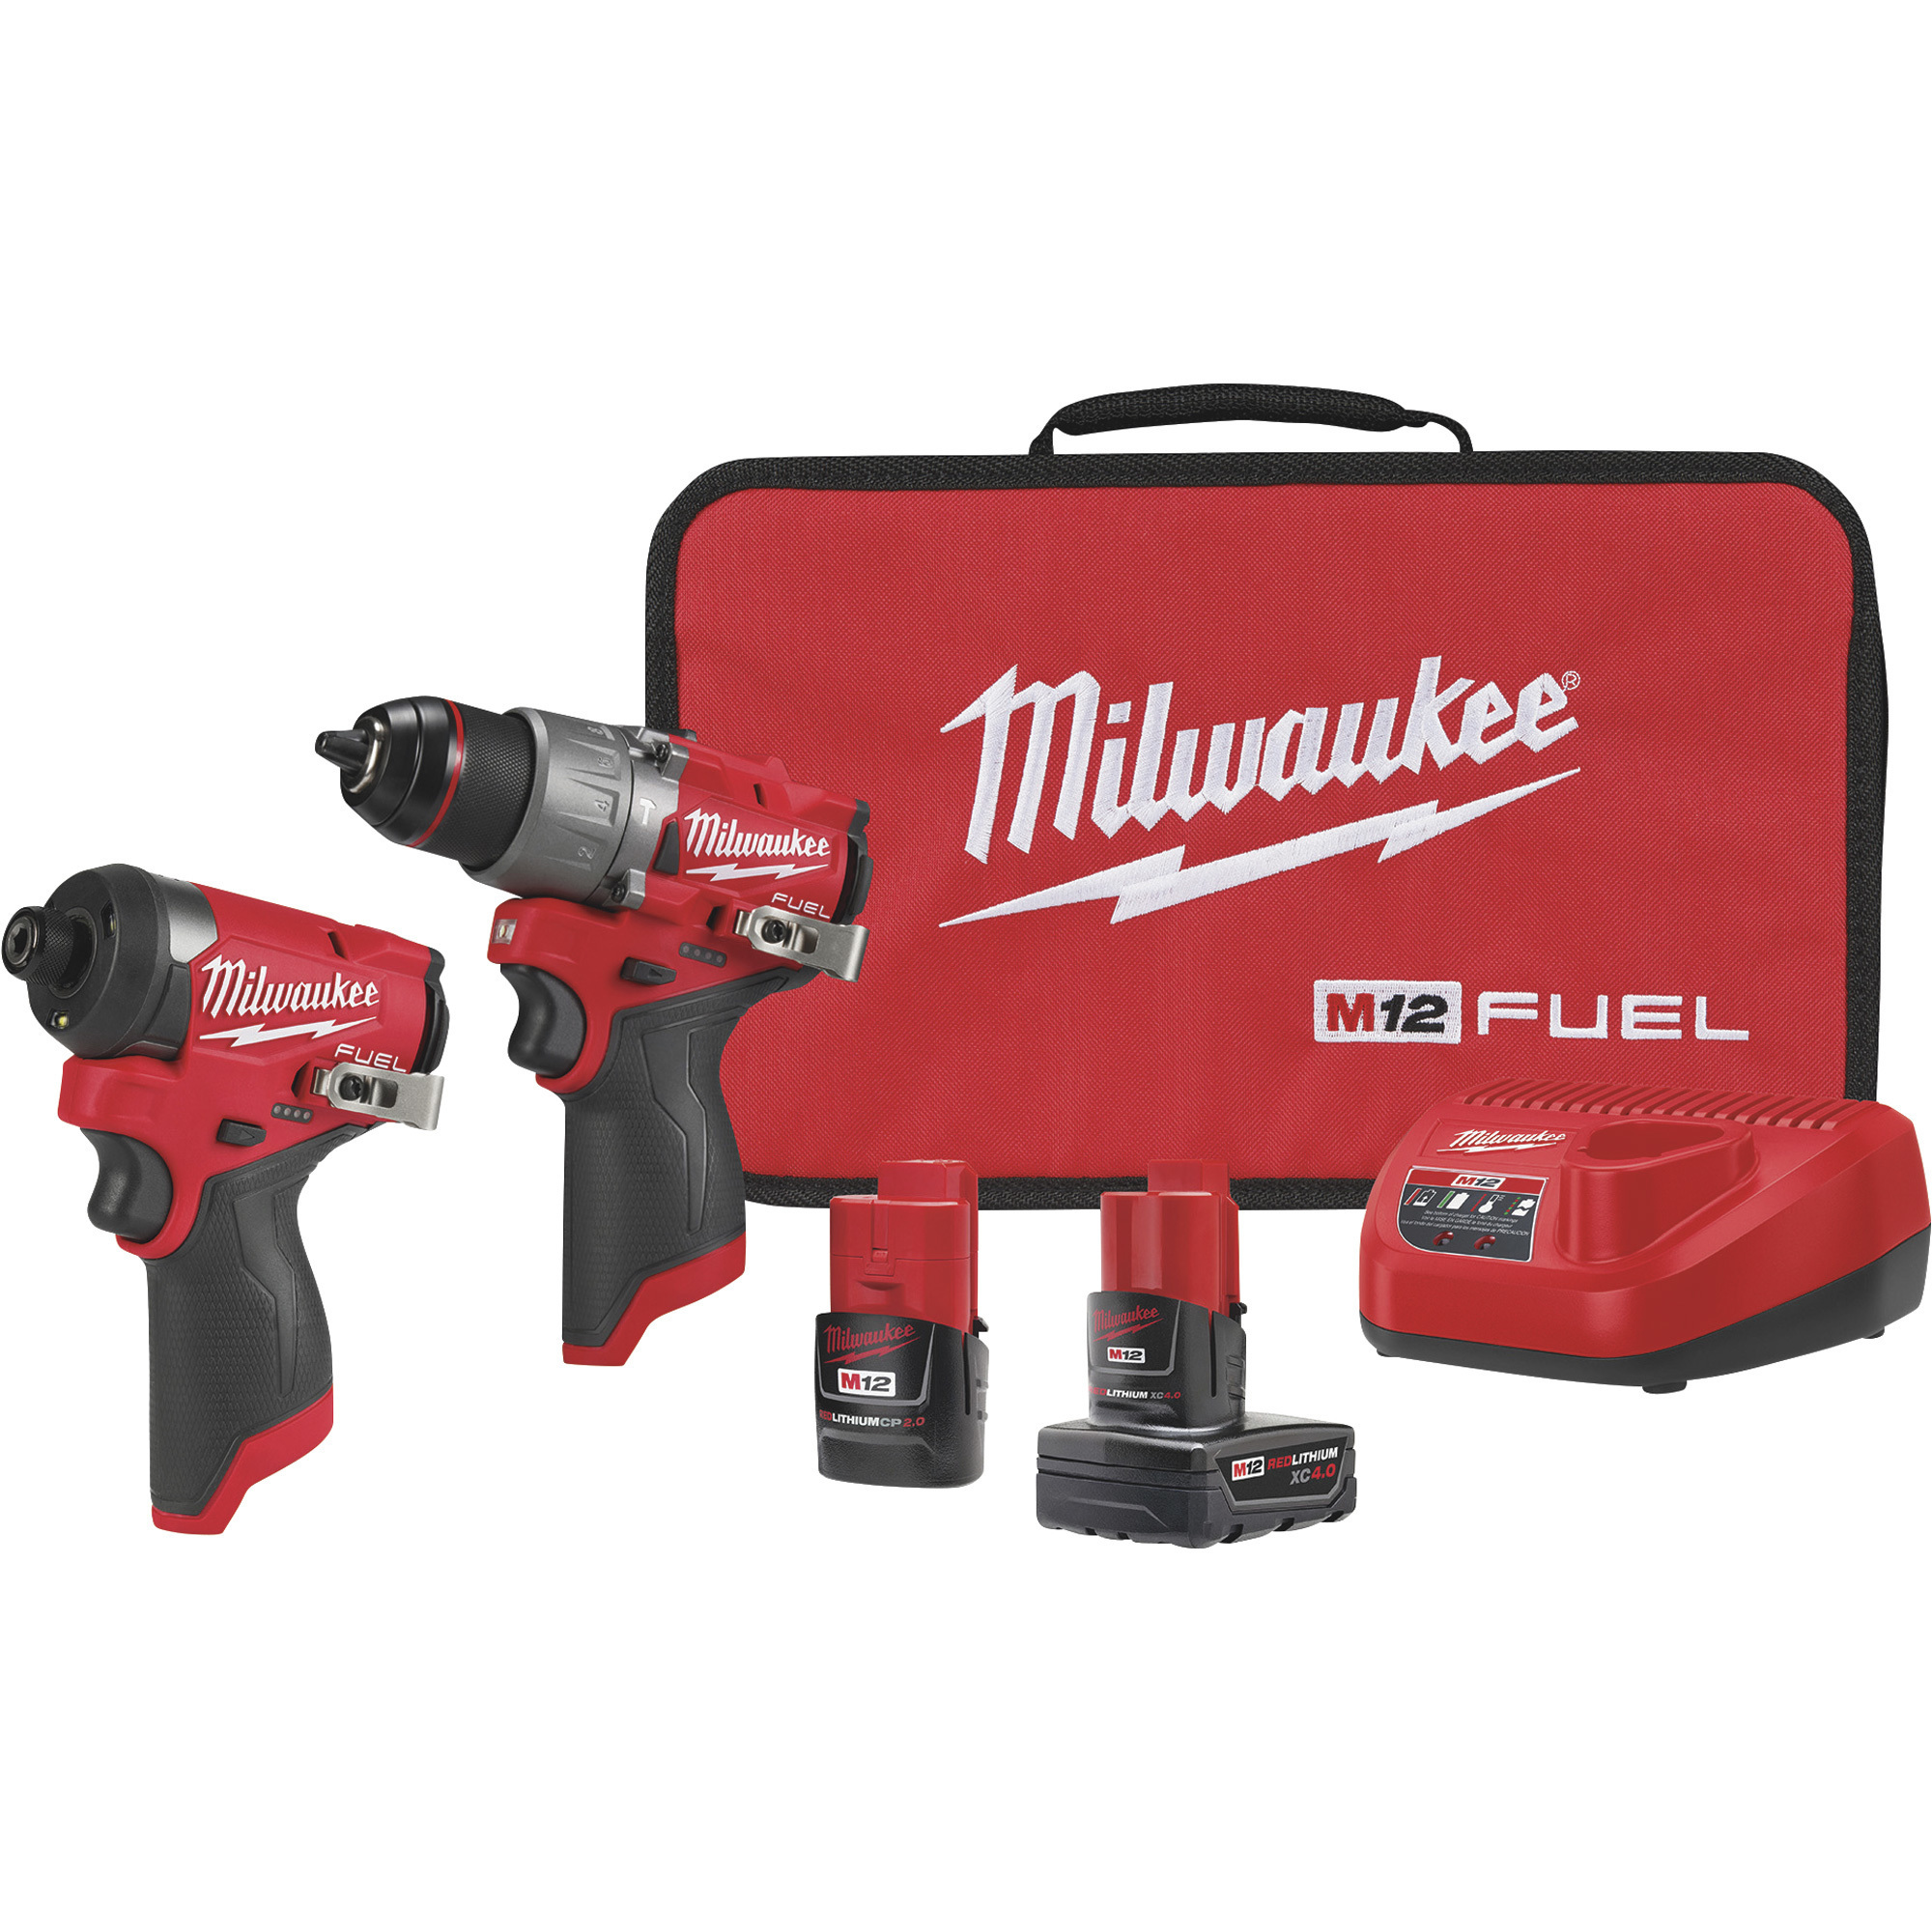 Milwaukee M12 FUEL 2-Tool Combo Kit, 1/2in. Drill Driver, 1/4in. Hex Impact  Driver, 2 Batteries, Charger, Model# 3497-22